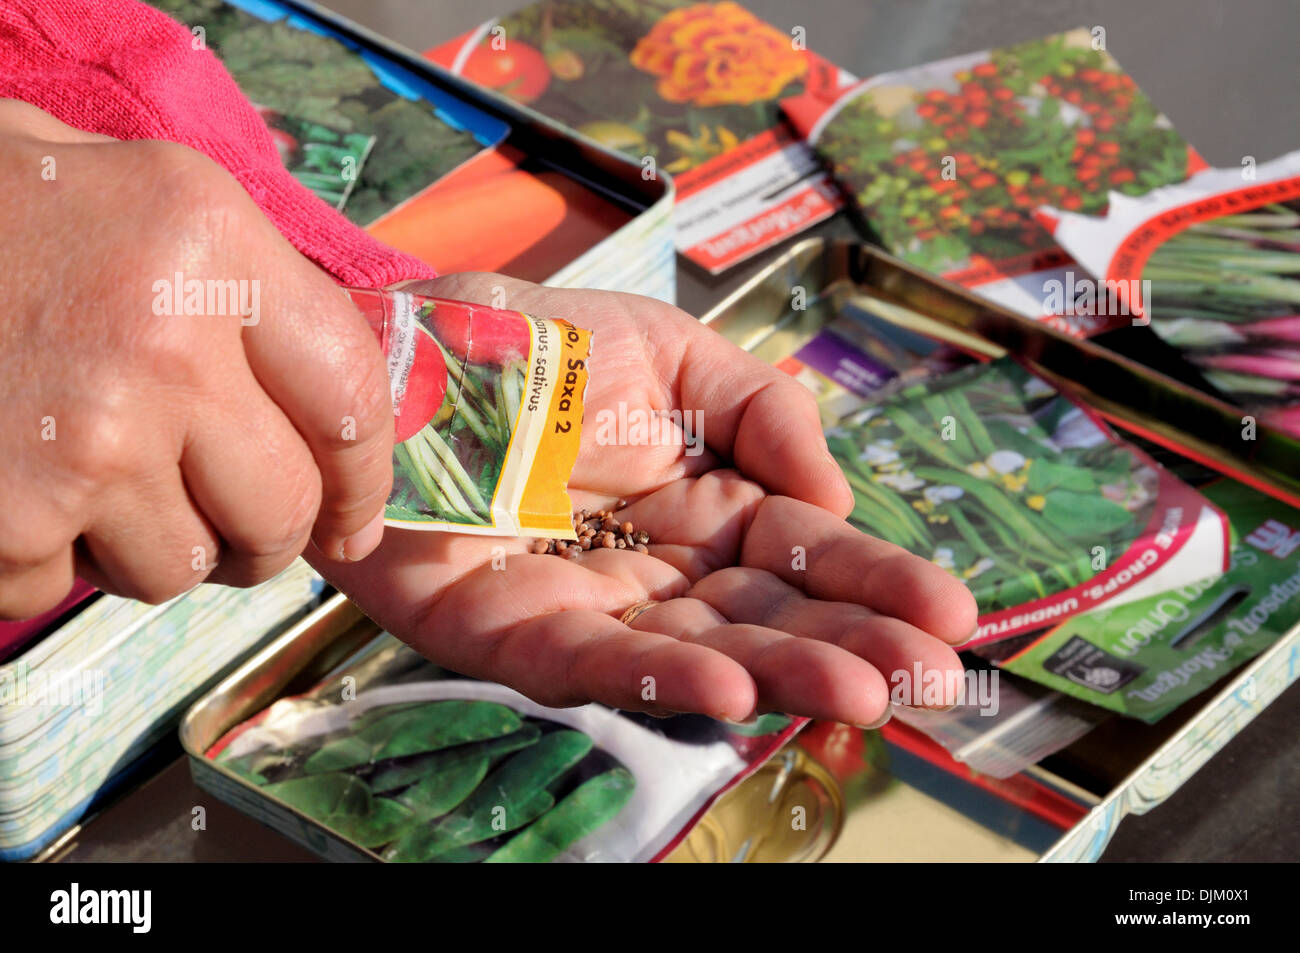 Woman shaking Radish seeds into palm of hand ready for sowing, England, UK, Western Europe. Stock Photo